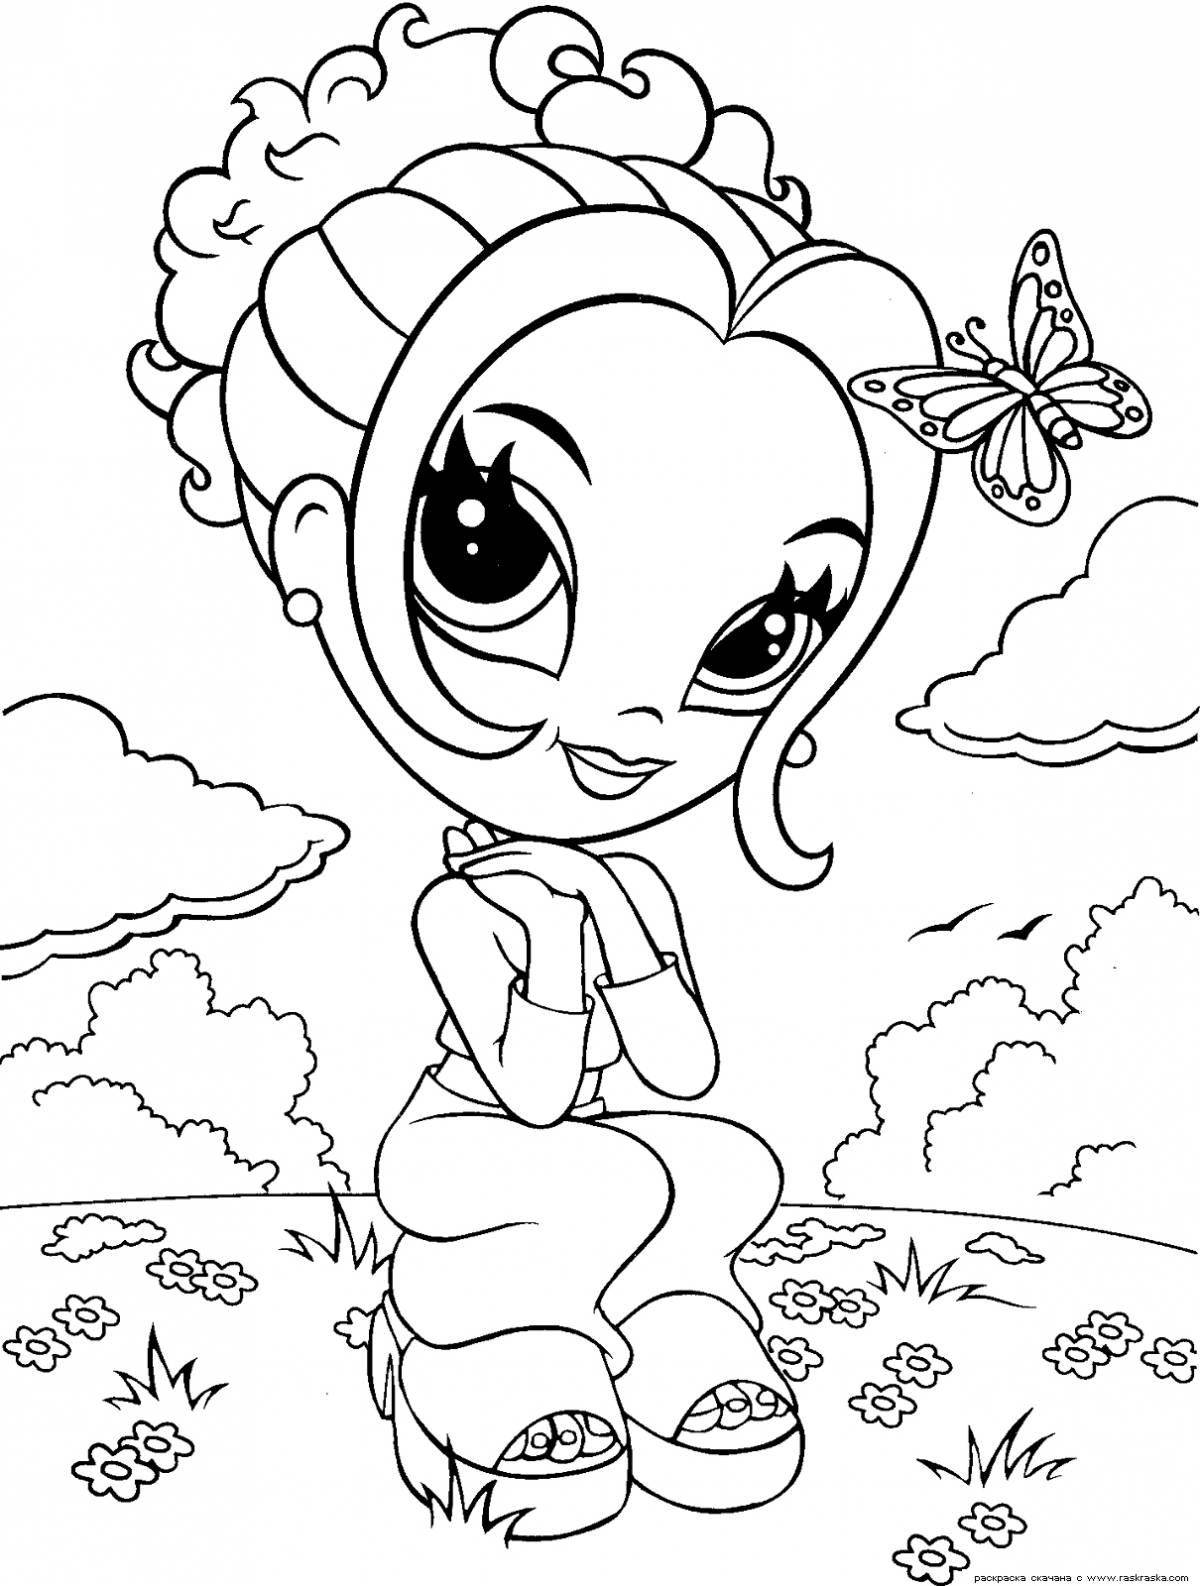 Colorful coloring pages of all kinds